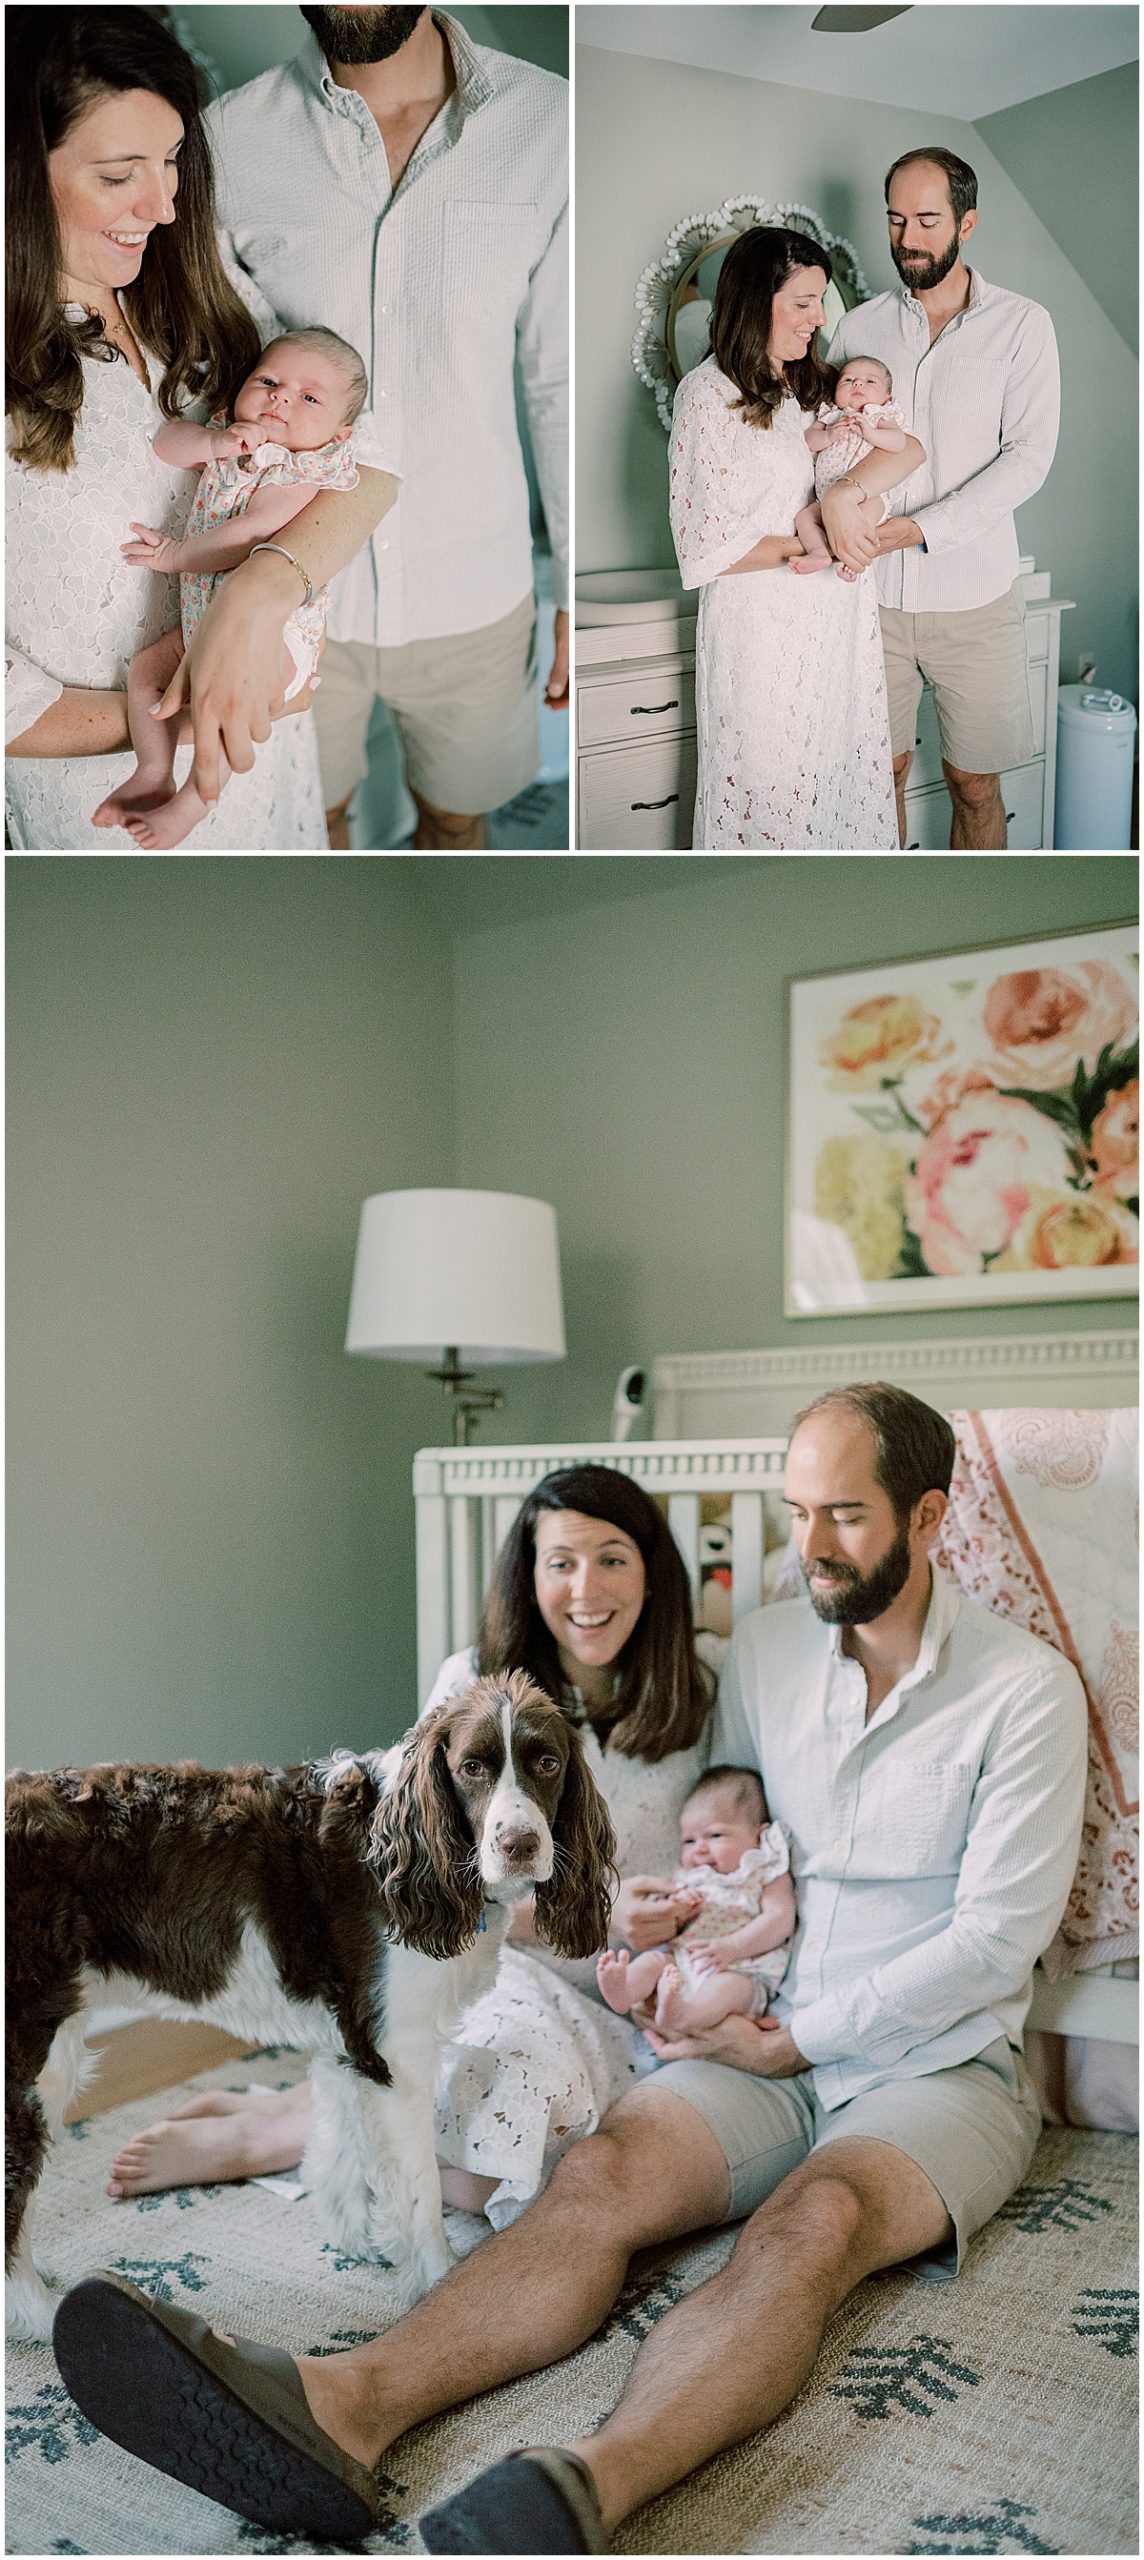 family dog in session with mom and dad holding newborn baby girl 